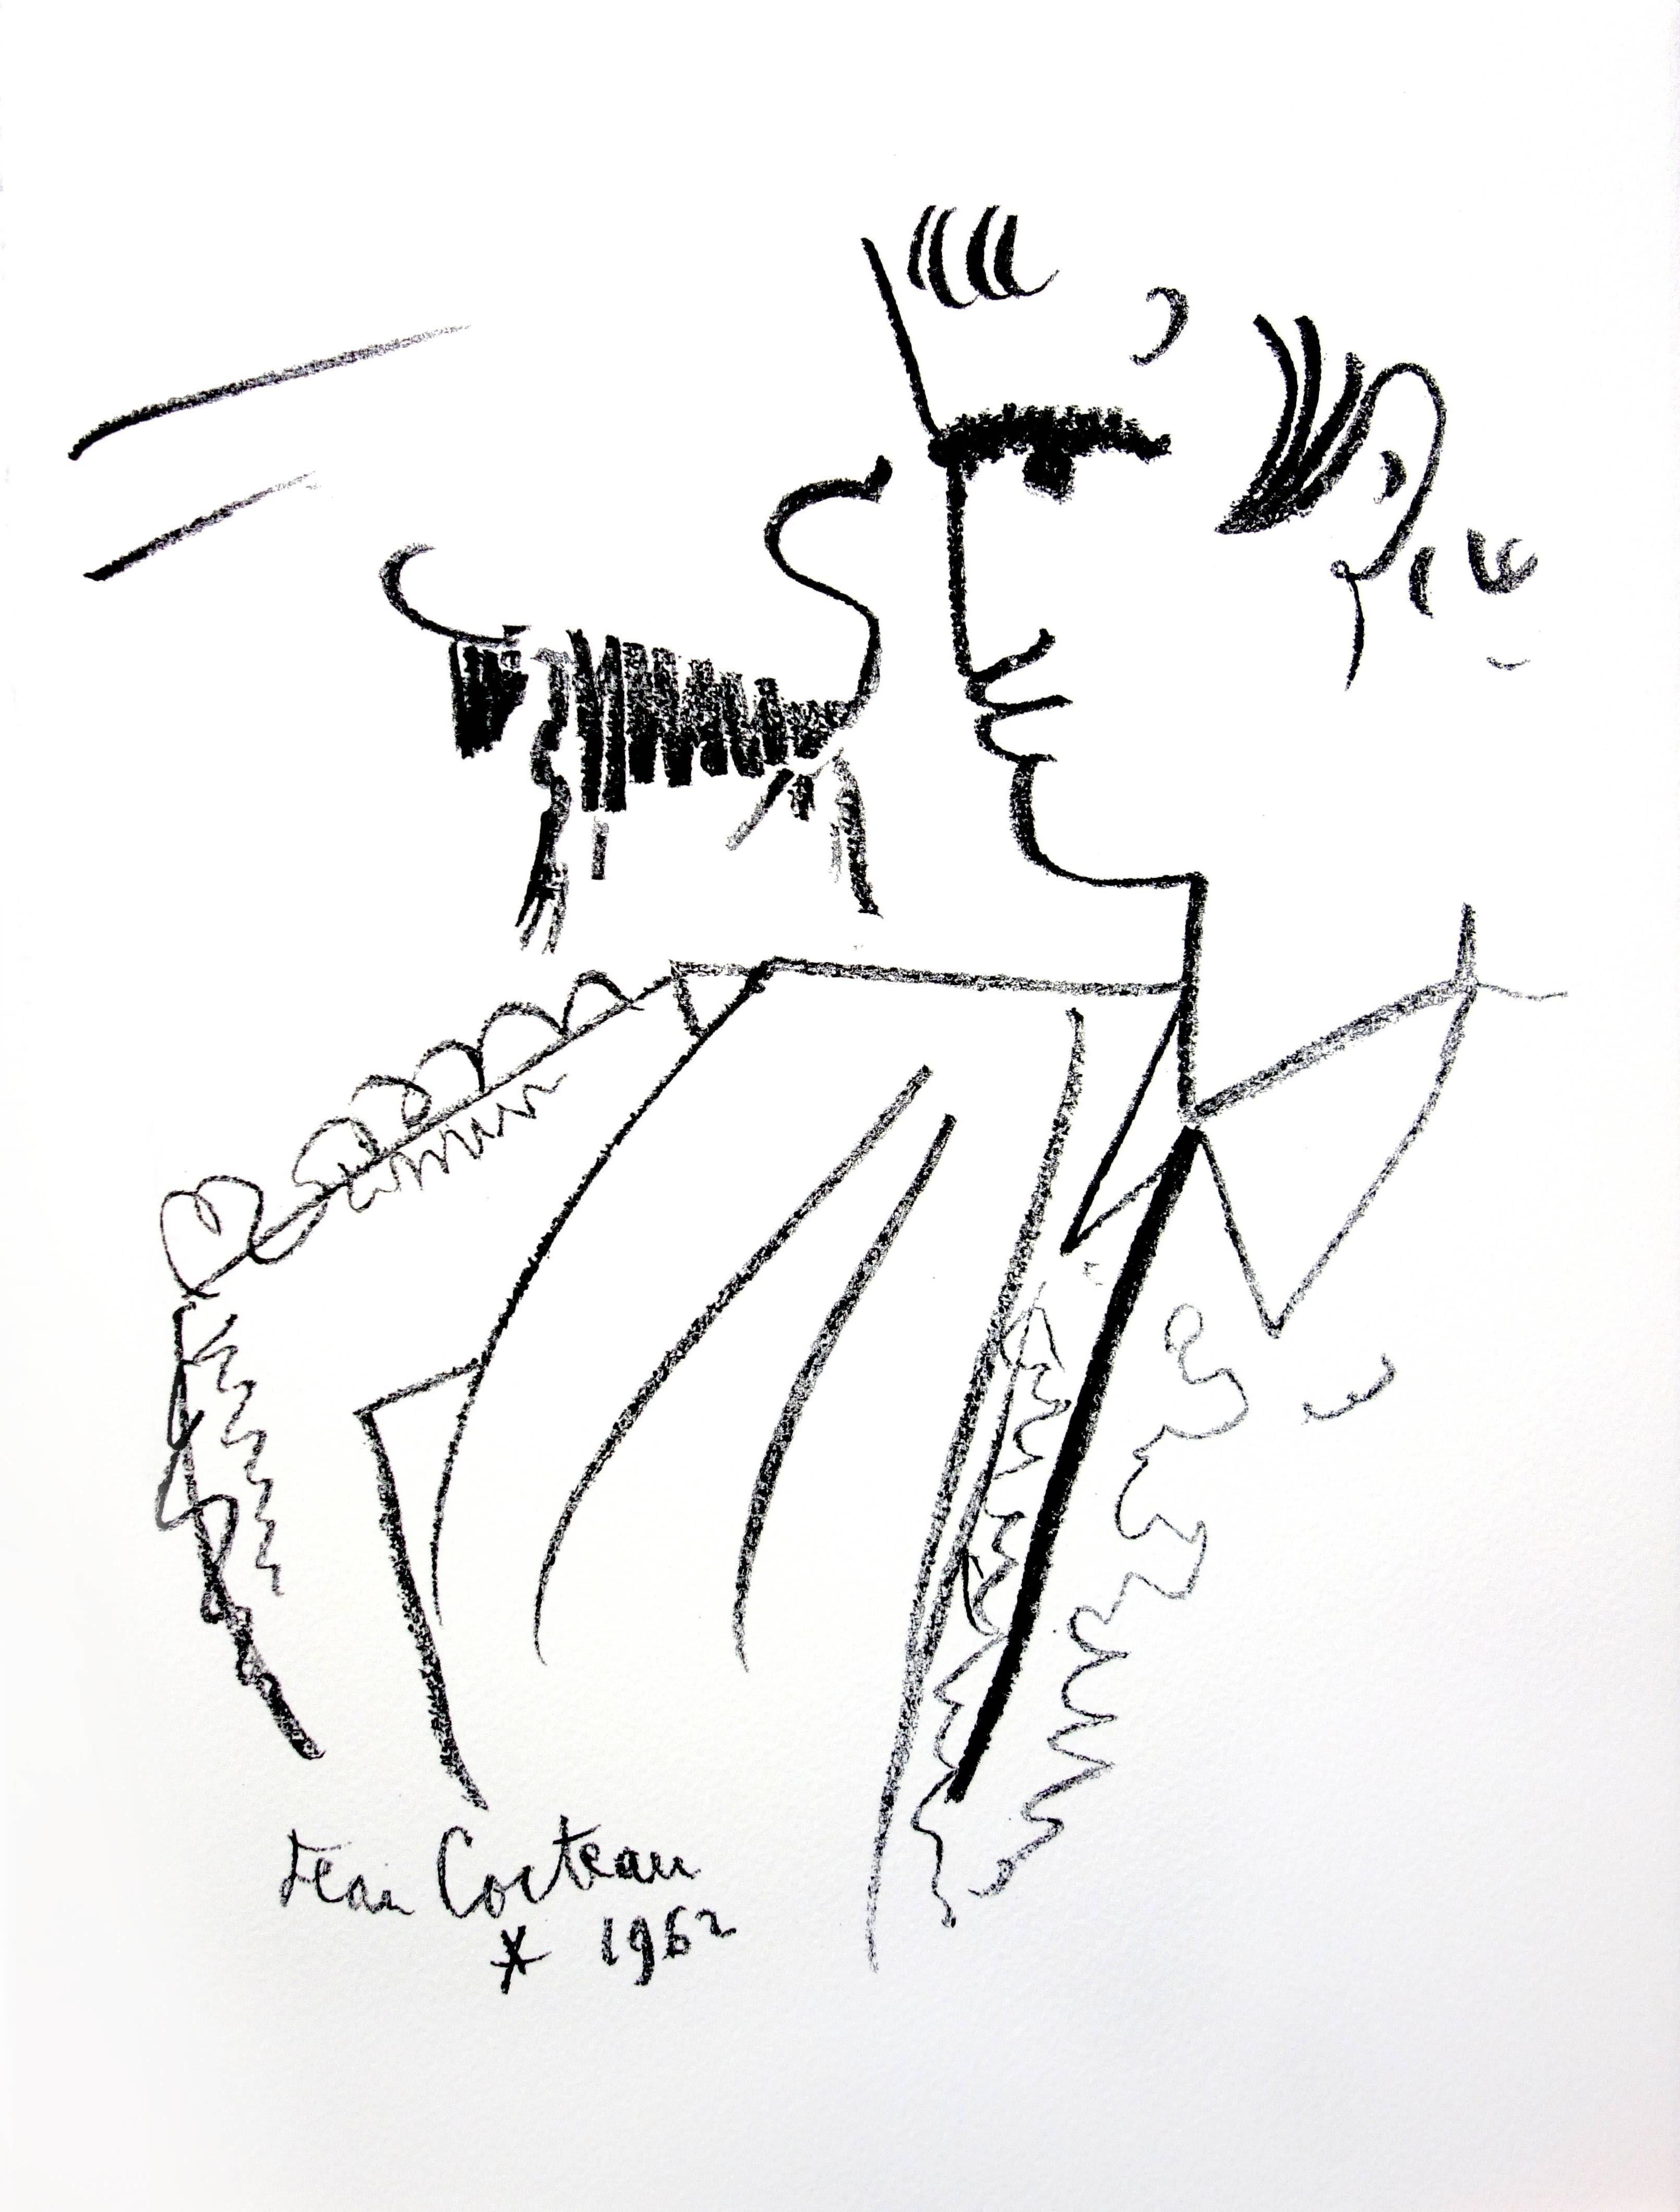 Original Lithograph by Jean Cocteau
Title: Taureaux
Signed in the plate
Dimensions: 40 x 30 cm
Edition: 200
Luxury print edition from the portfolio of Trinckvel
1965

Jean Cocteau

Writer, artist and film director Jean Cocteau was one of the most